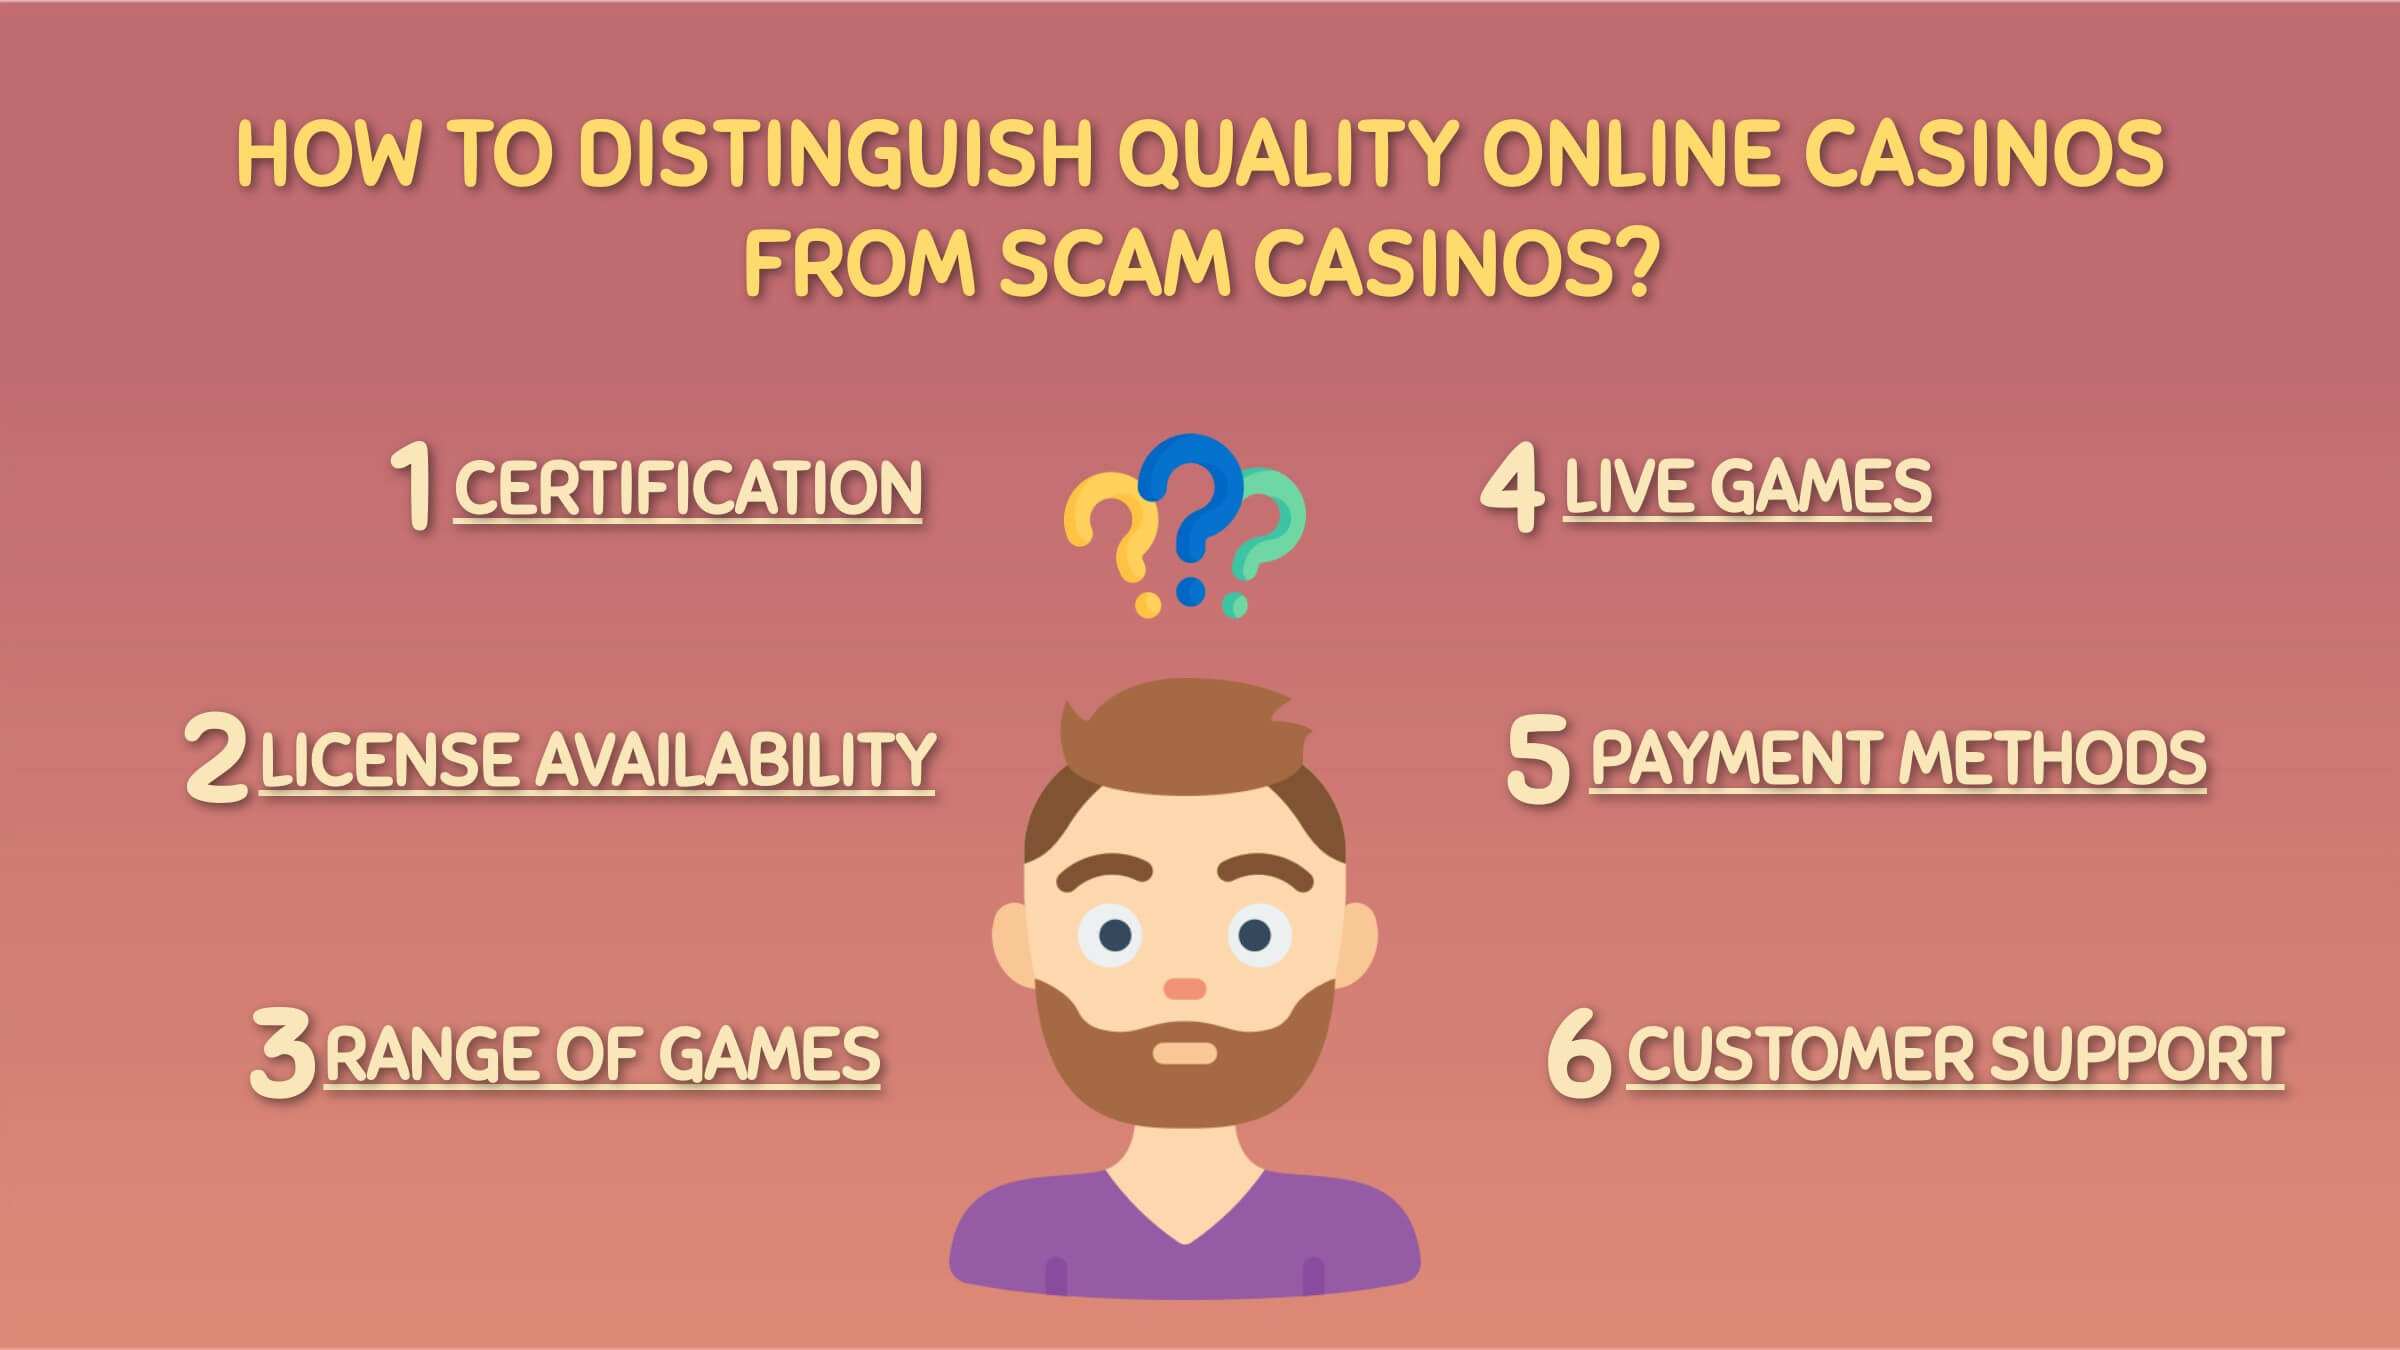 Visit a site with a rating of quality casinos